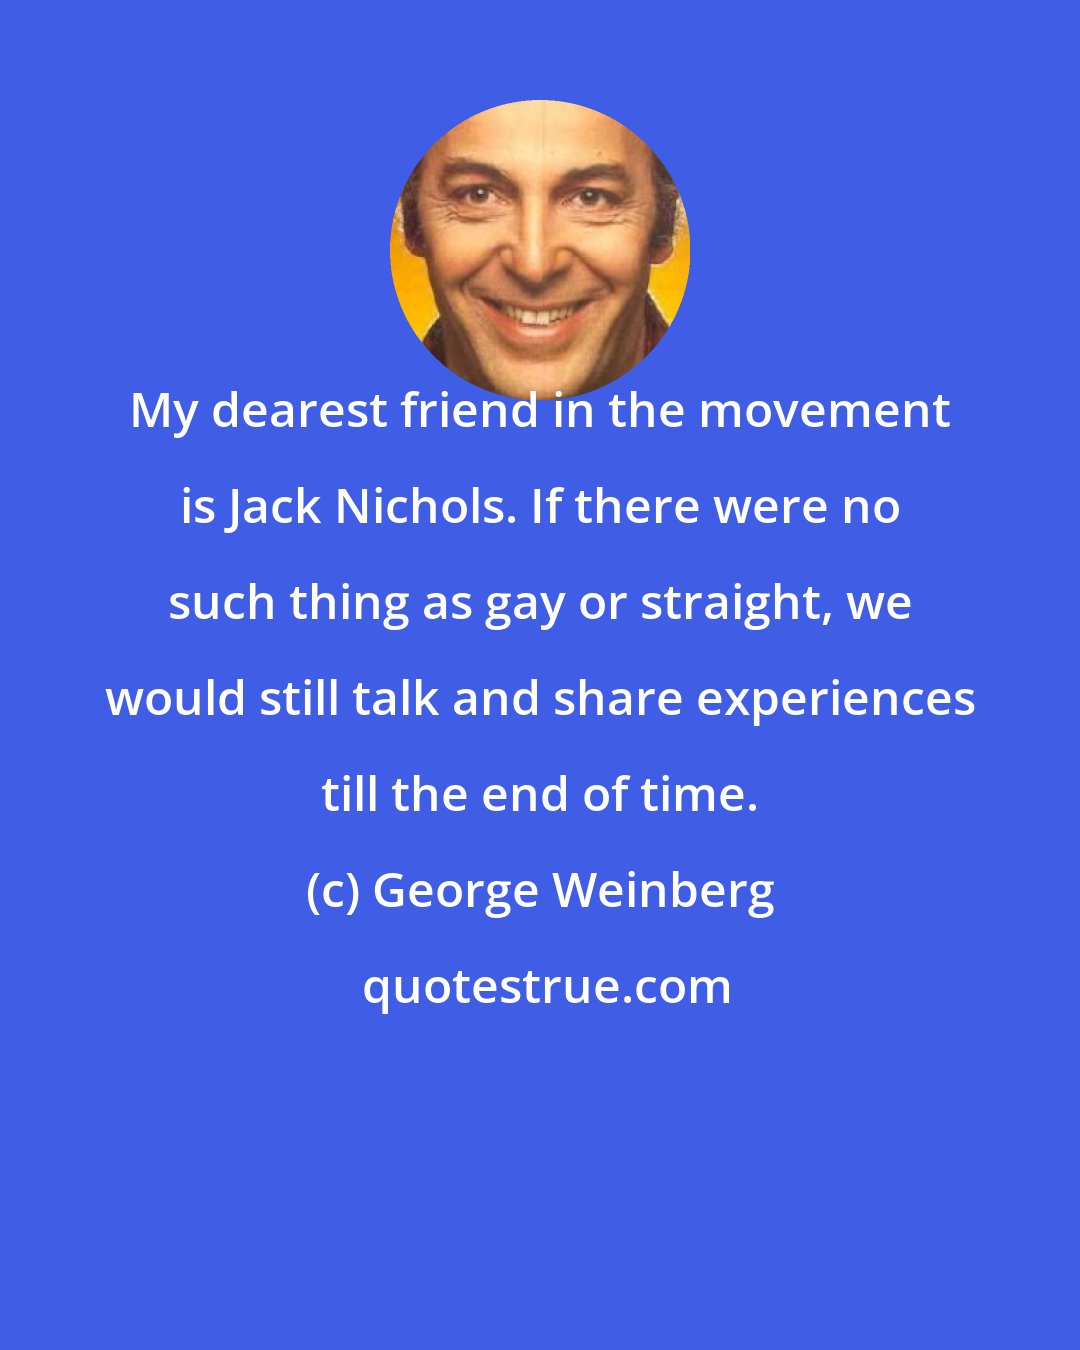 George Weinberg: My dearest friend in the movement is Jack Nichols. If there were no such thing as gay or straight, we would still talk and share experiences till the end of time.